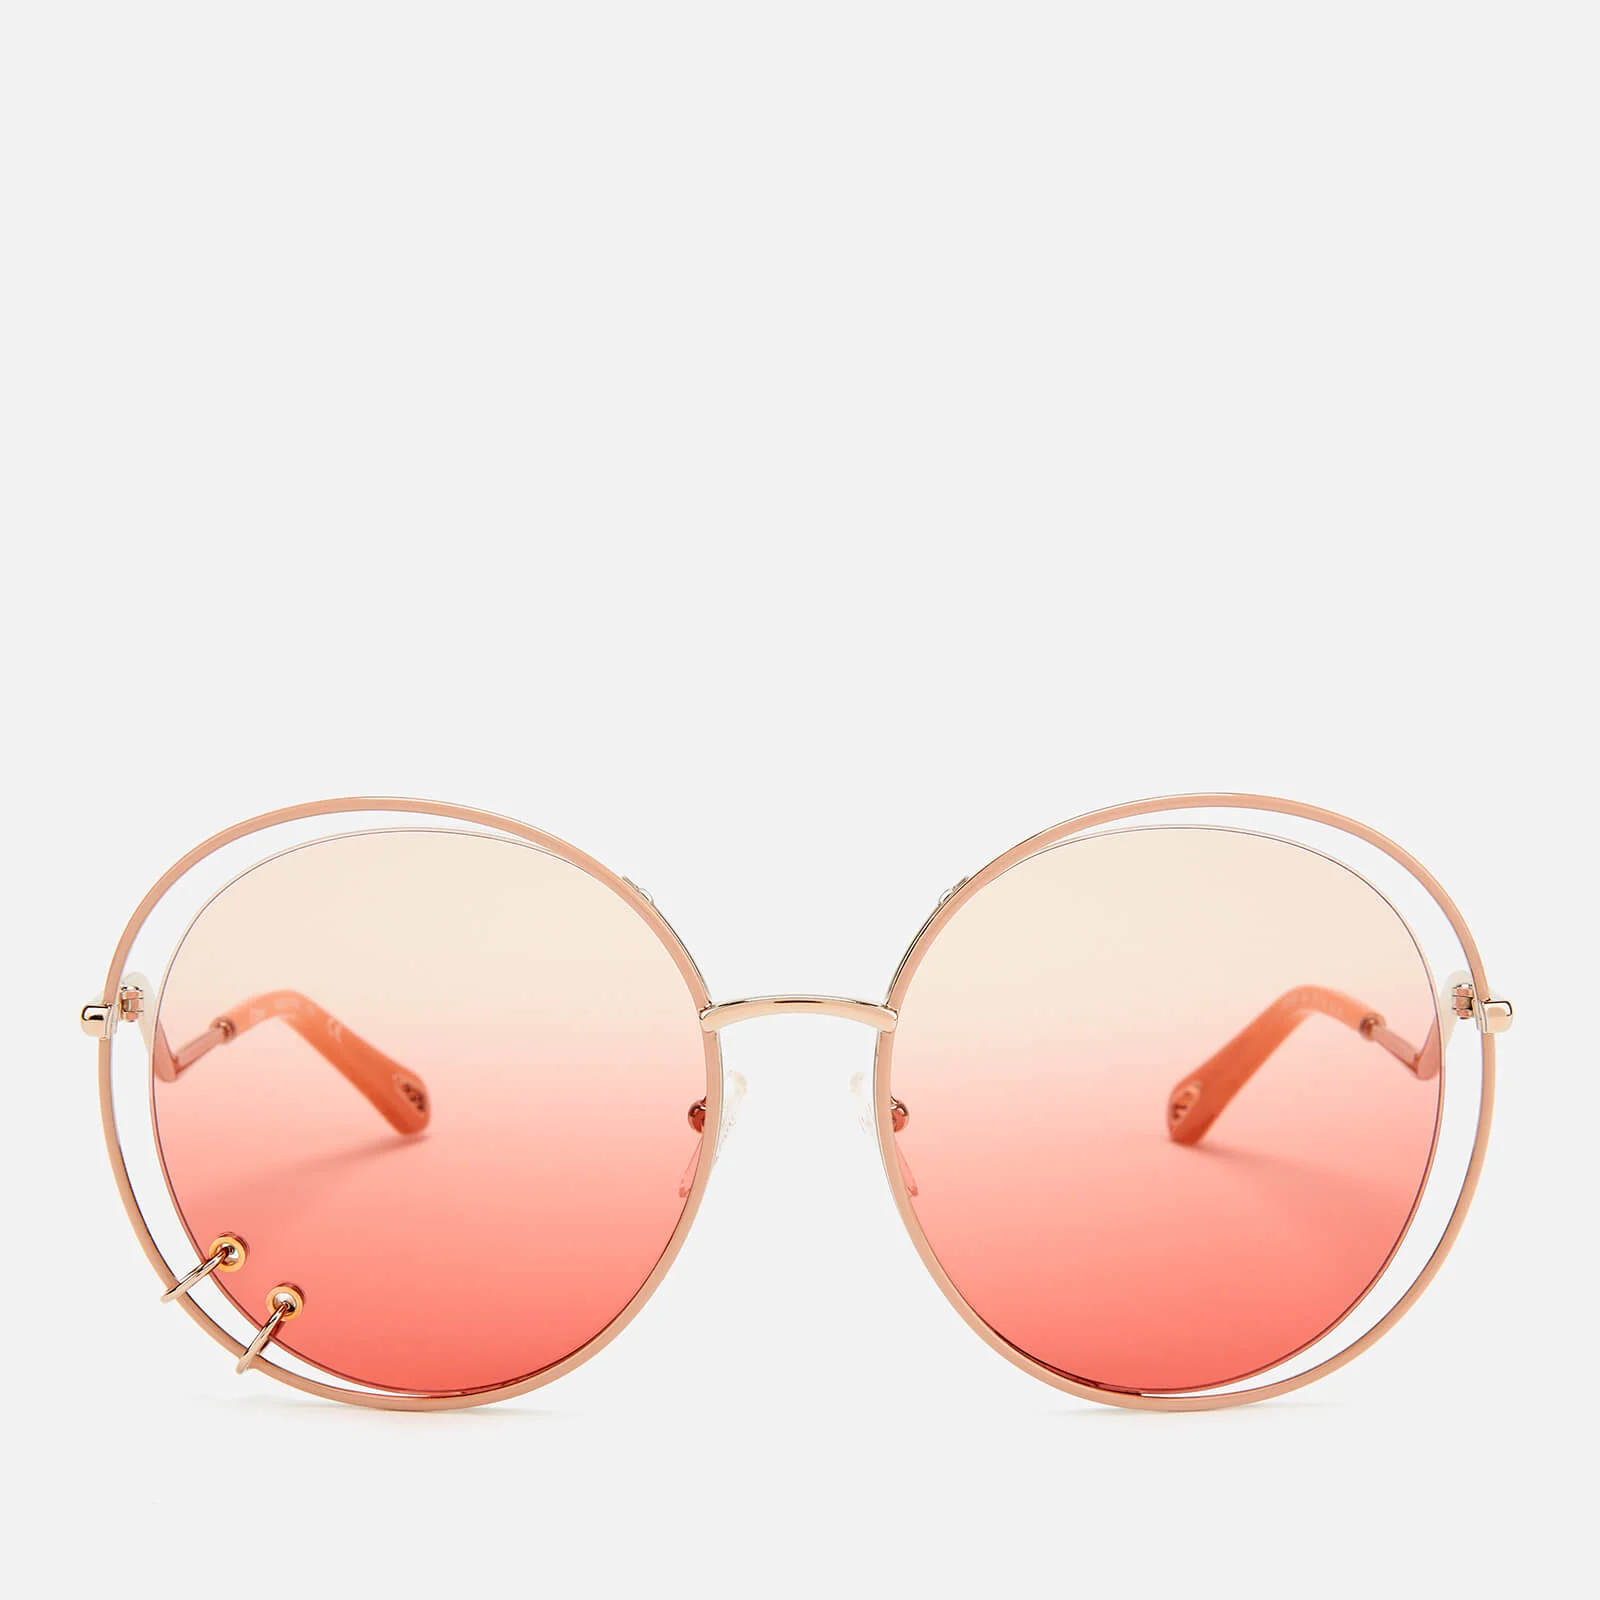 Chloé Women's Wendy Round Frame Sunglasses - Rose Gold/Gradient Rose Image 1